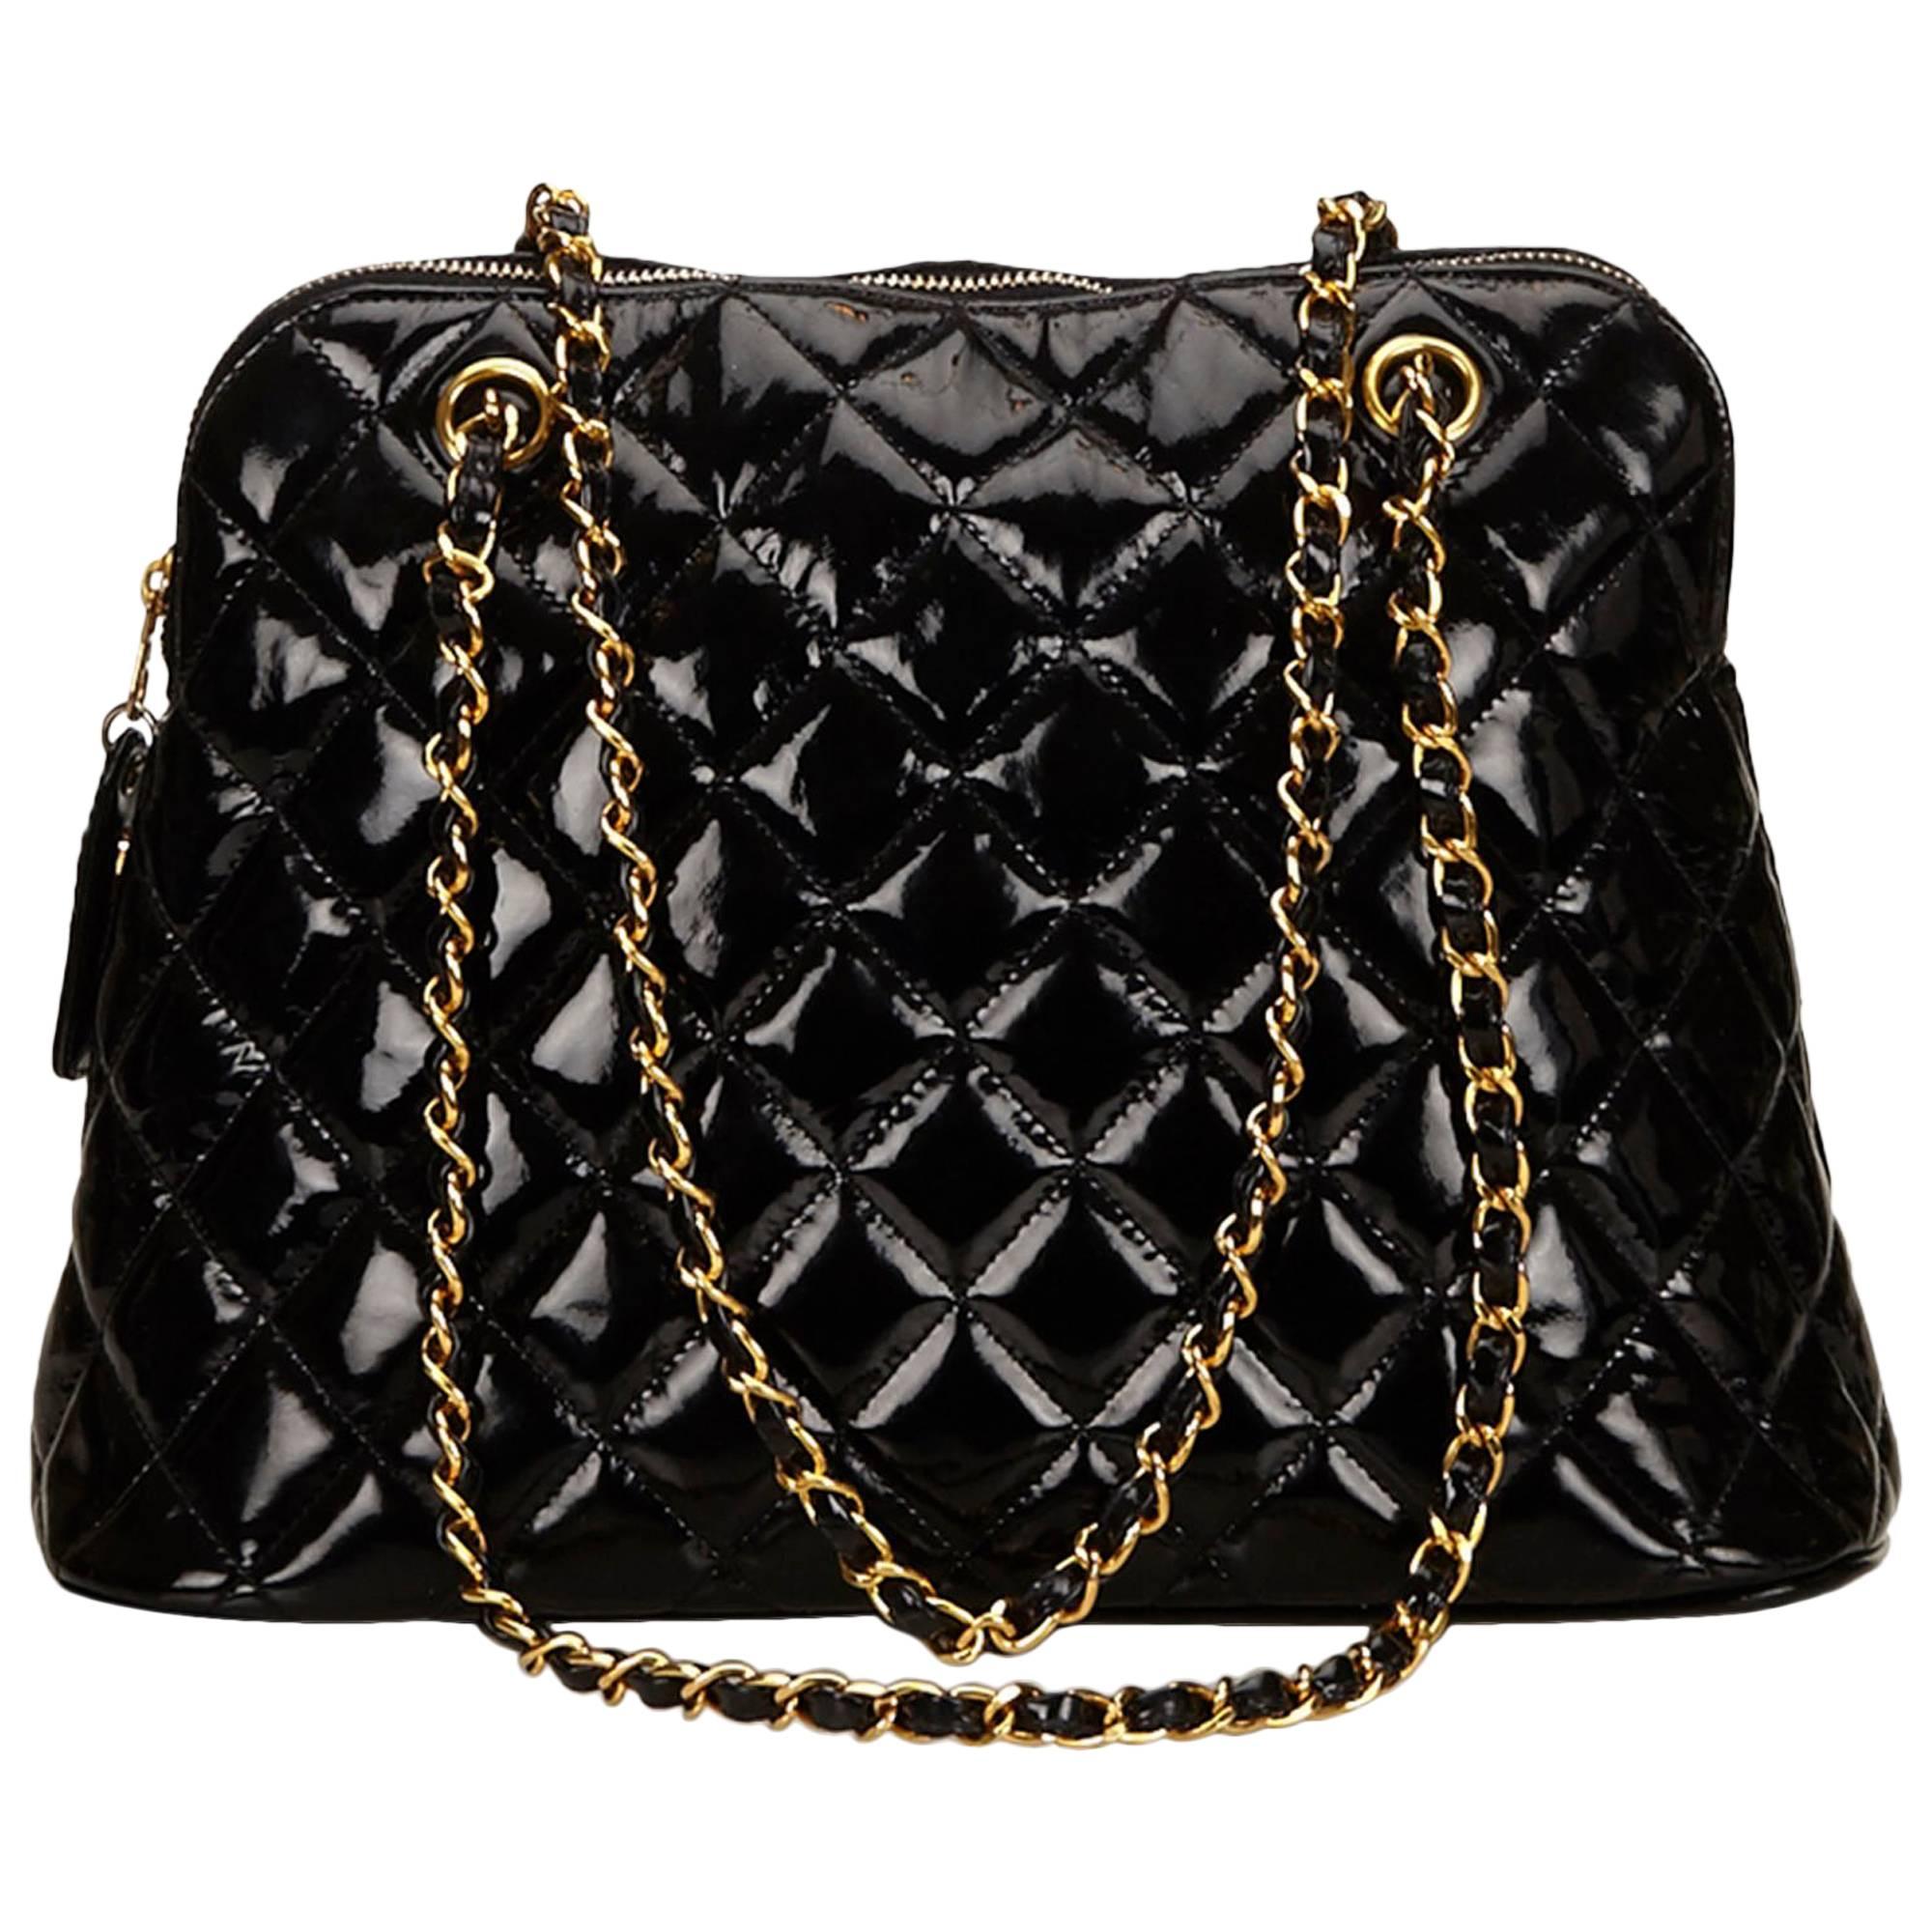 Chanel Matelasse Black Quilted Patent Leather Gold Chain Shoulder Bag